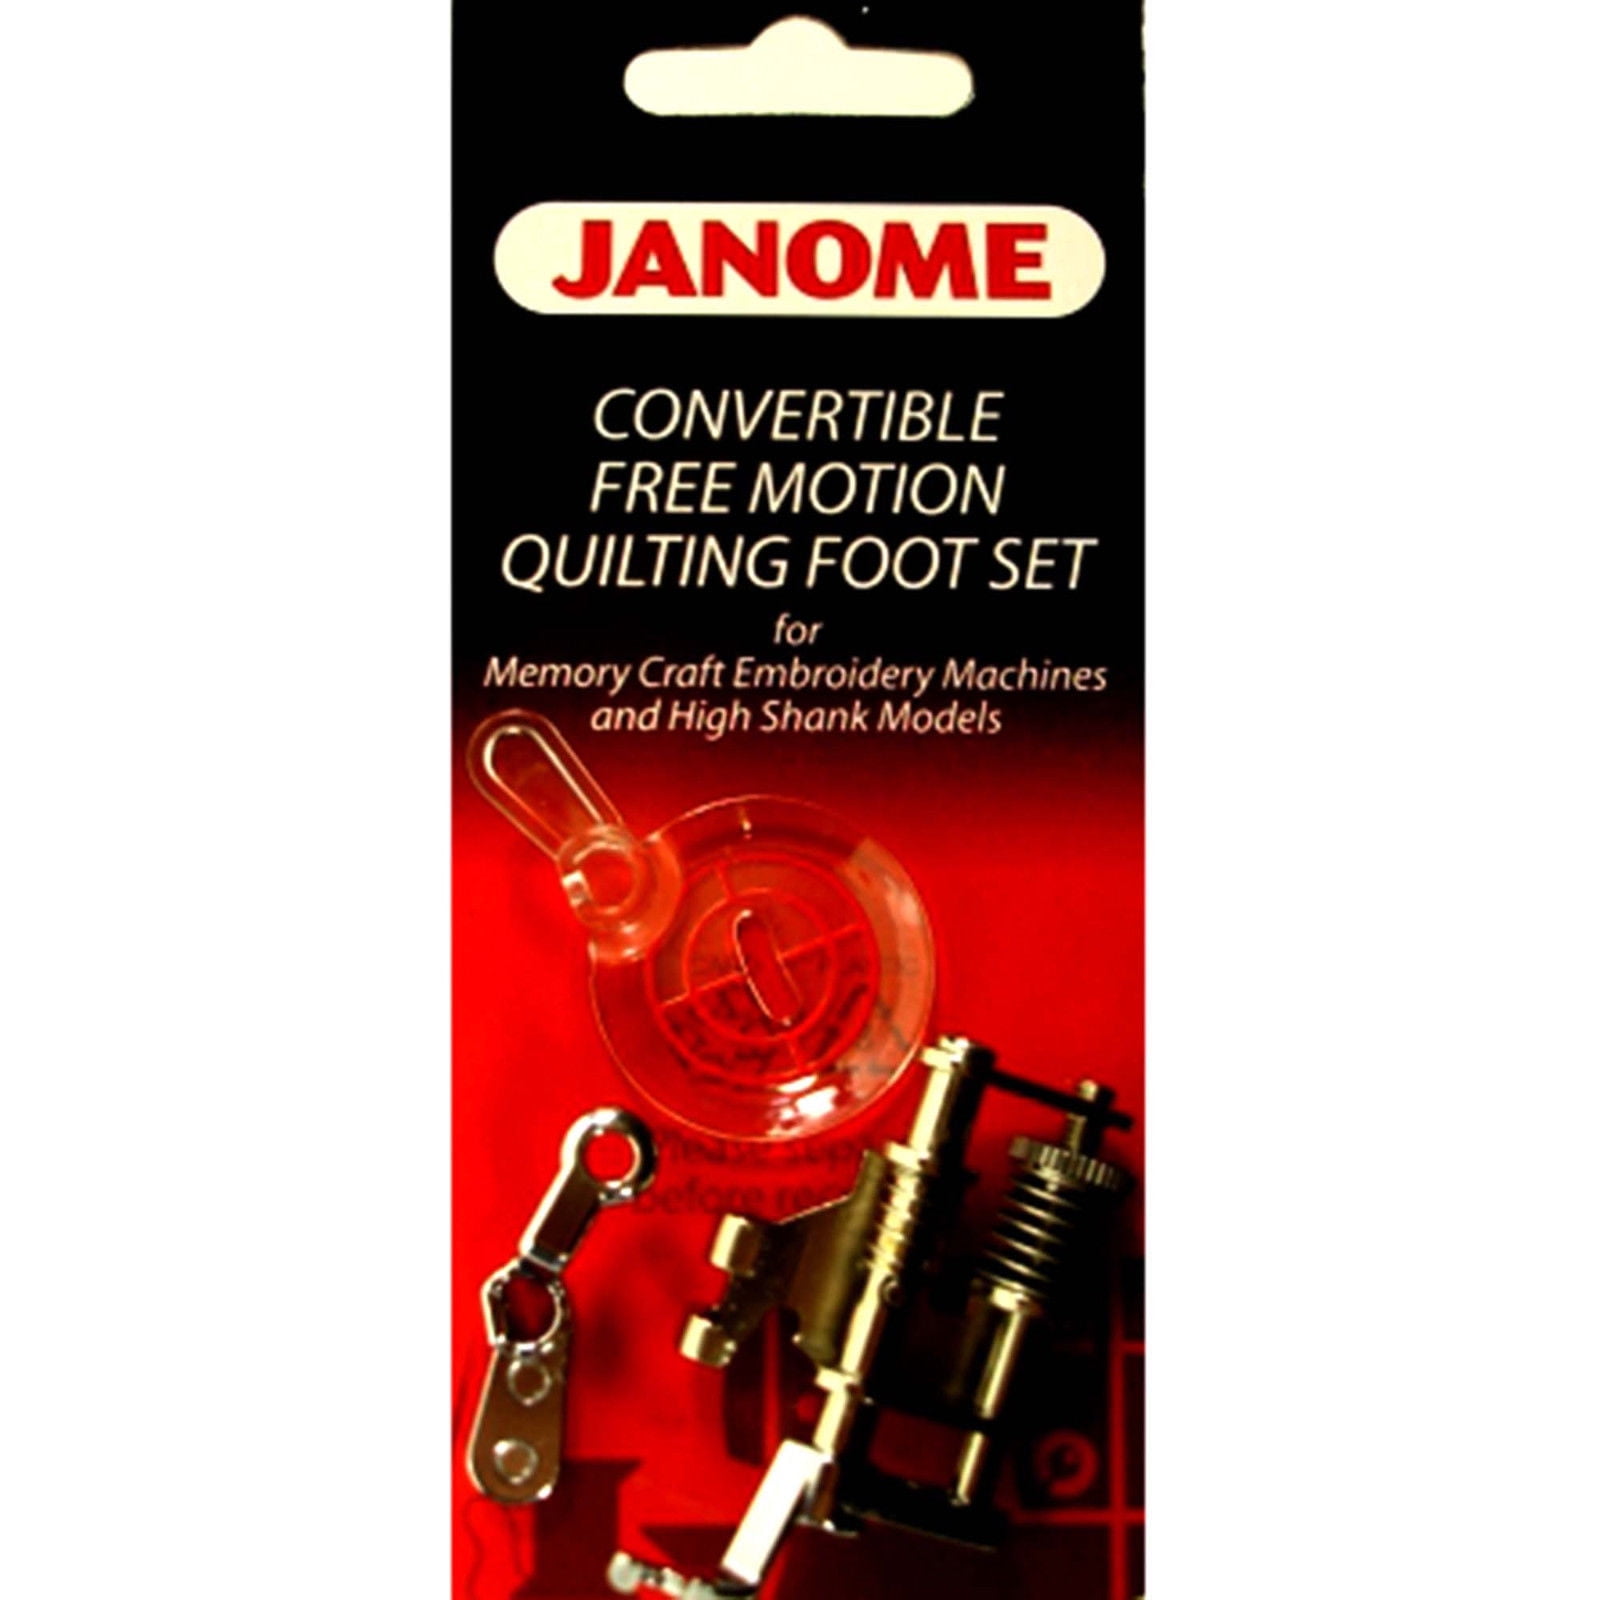 Convertible Free Motion Quilting Foot Set - Janome